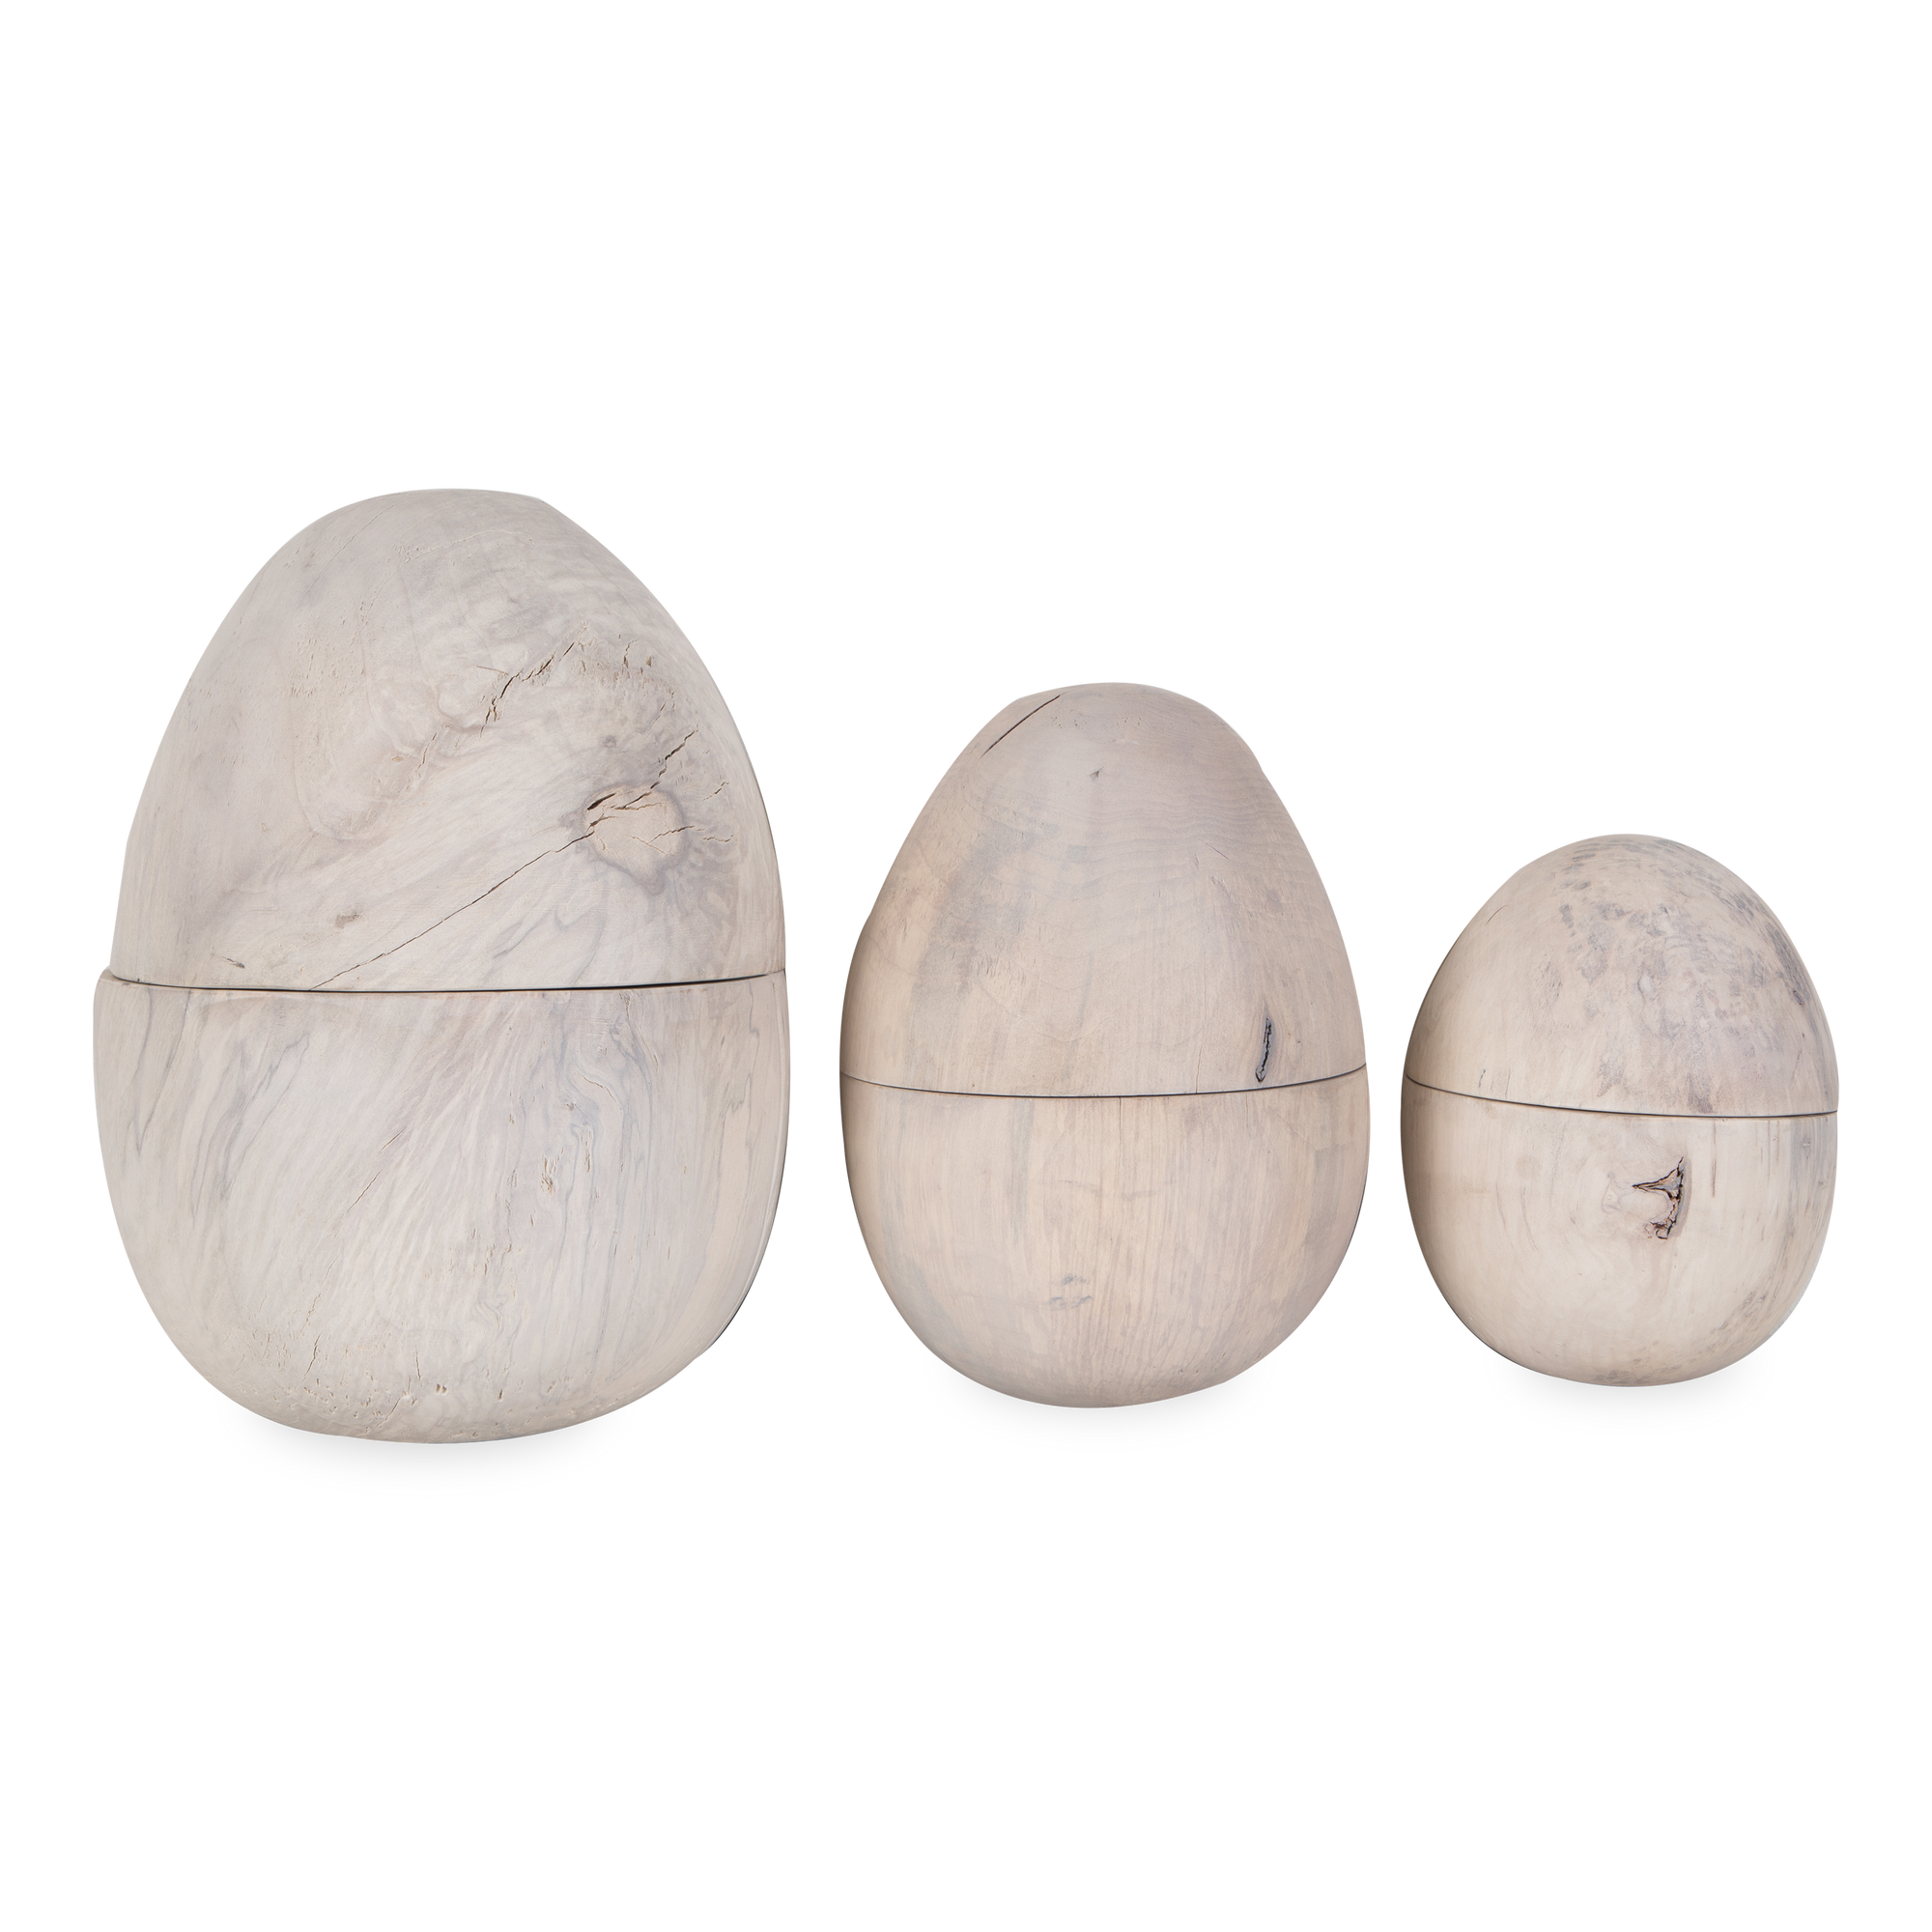 Handmade in Mexico from reclaimed wood, The Egg Box provides a unique yet organic look to any countertop or shelf.